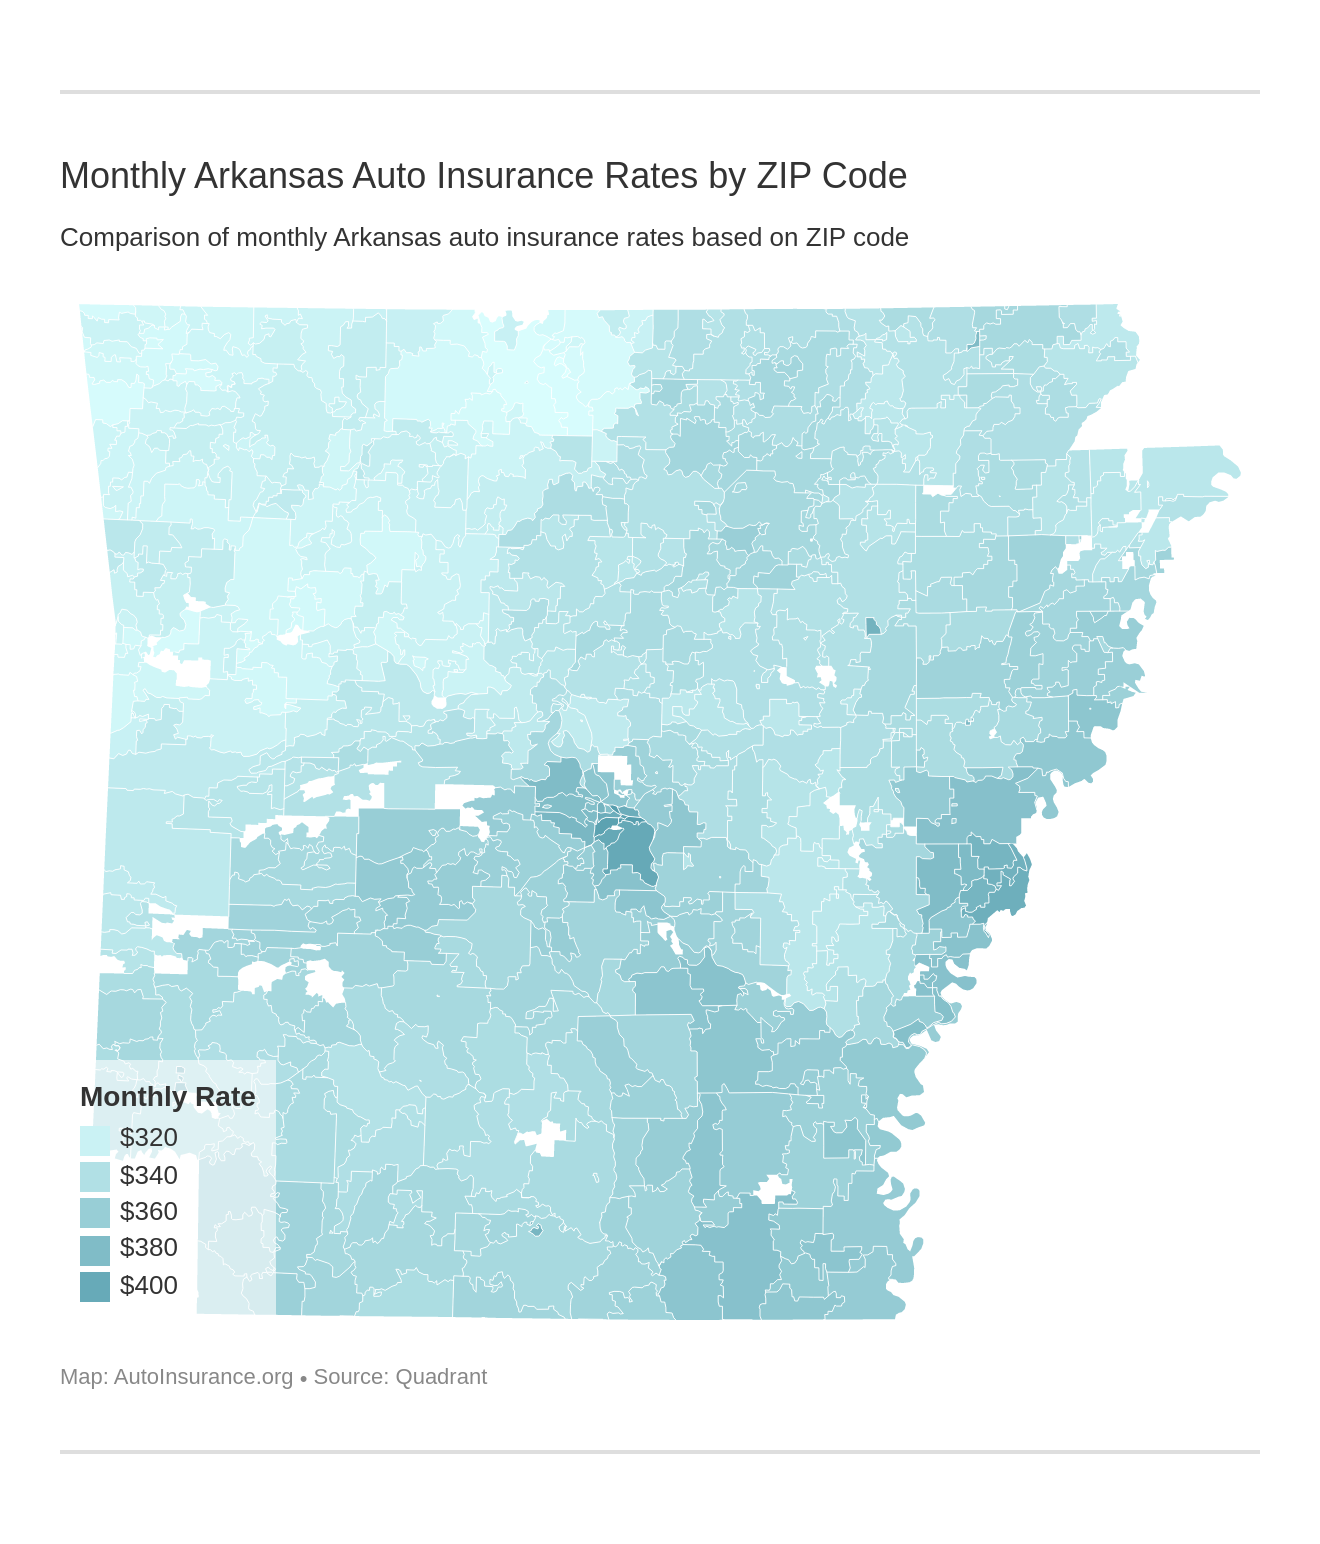 Monthly Arkansas Auto Insurance Rates by ZIP Code